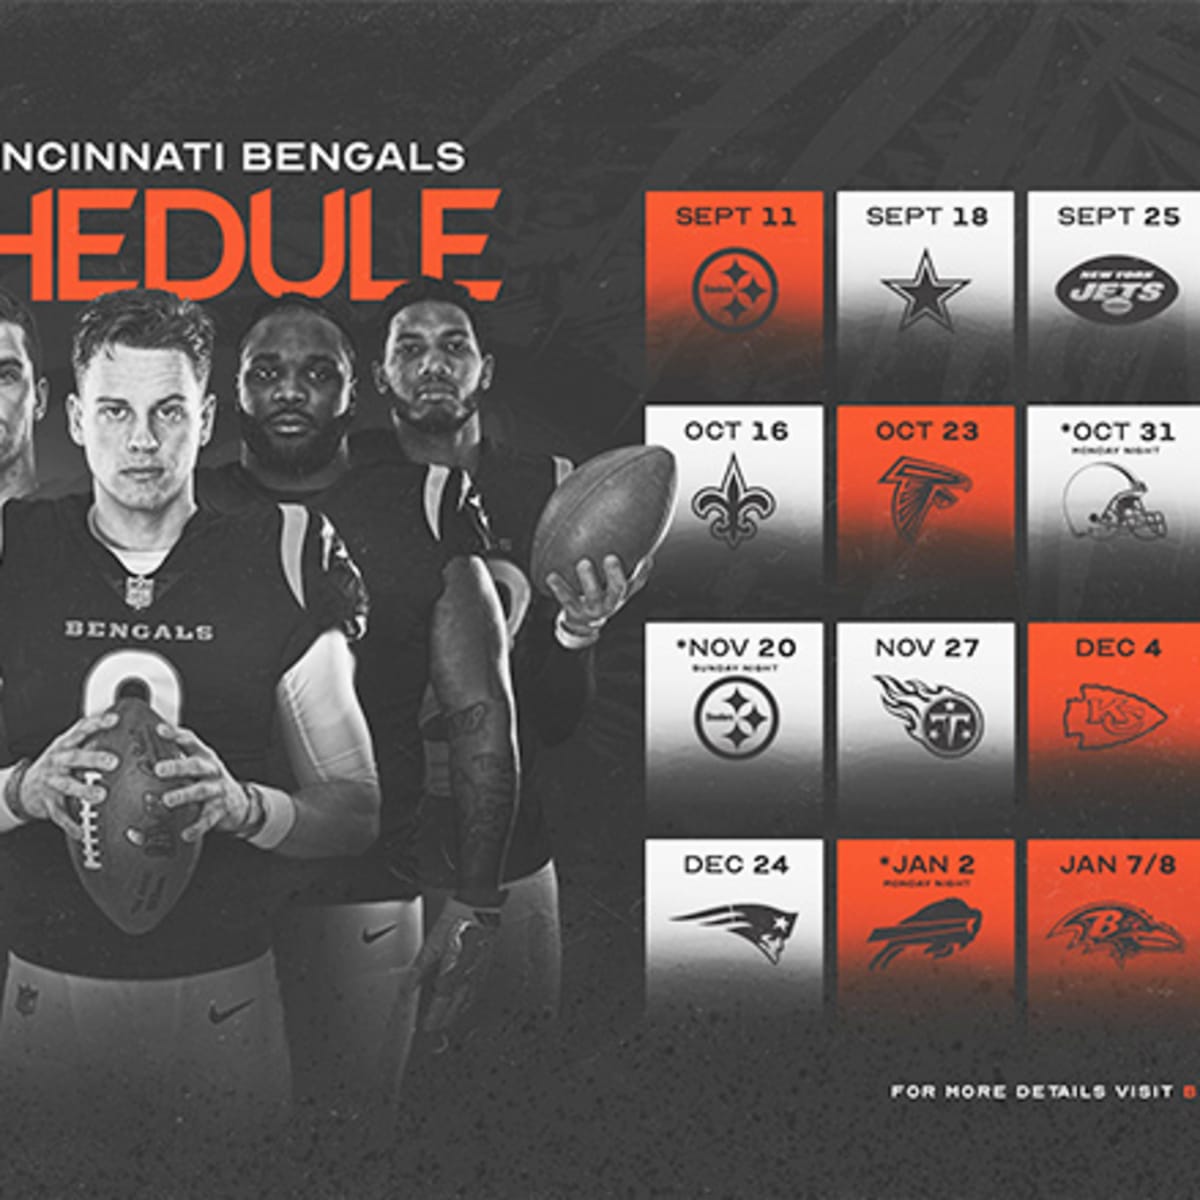 when do the bengals play this weekend